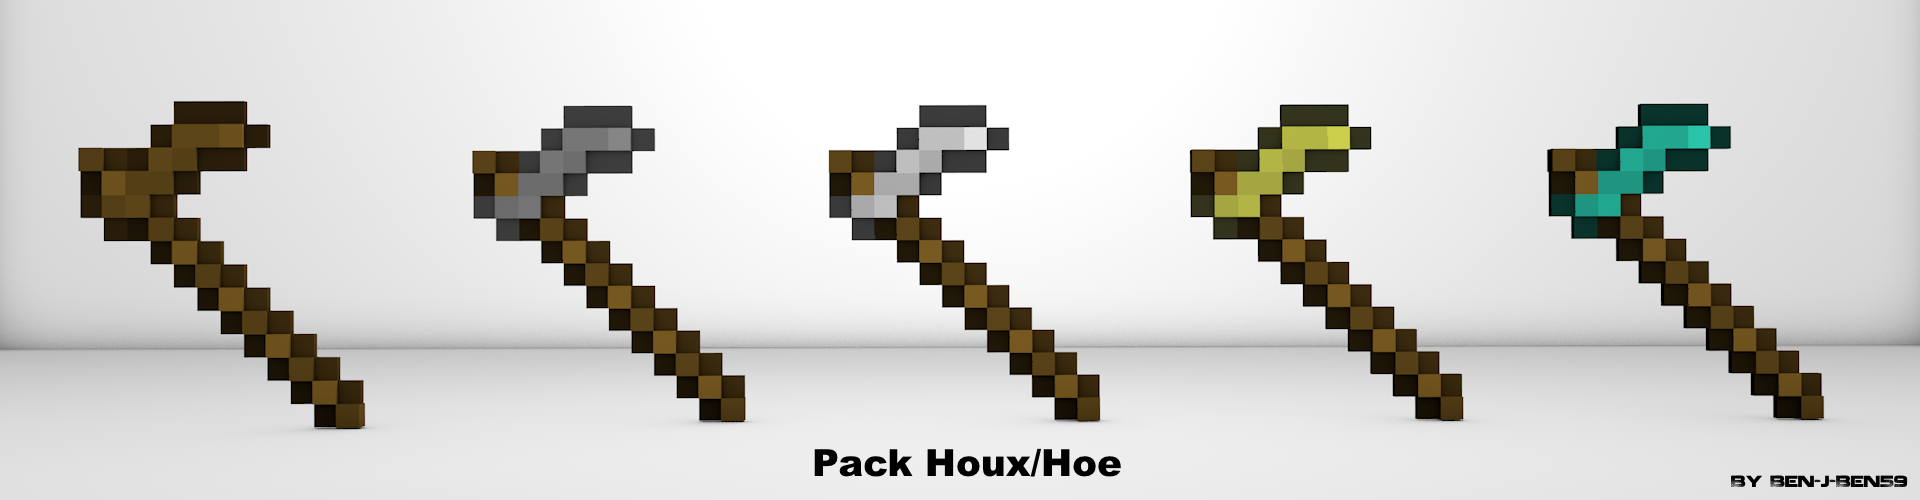 Pack_Houx.png